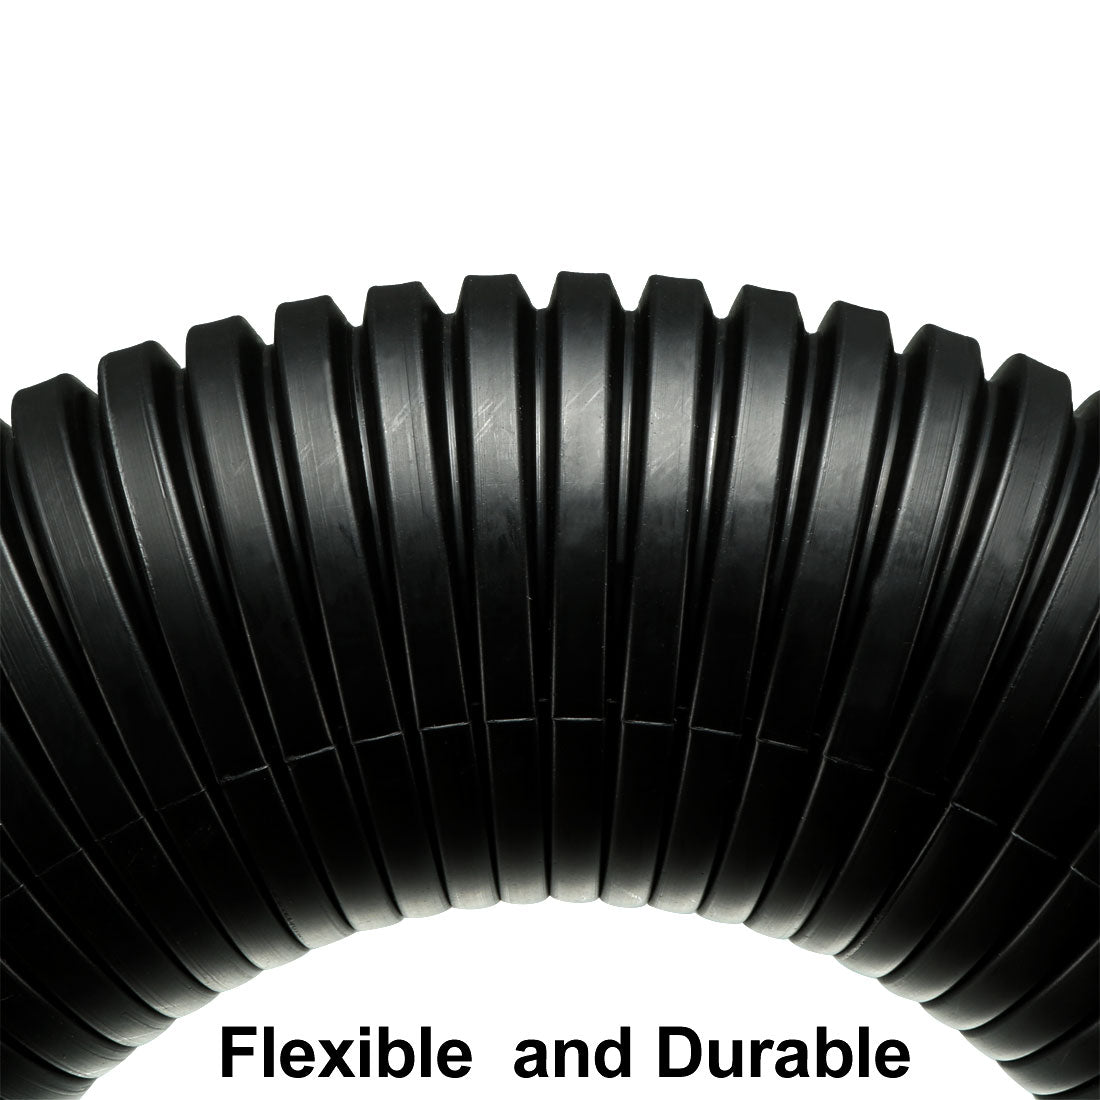 uxcell Uxcell 4 M 36 x 42.5 mm PP Flexible Corrugated Conduit Tube for Garden,Office Black